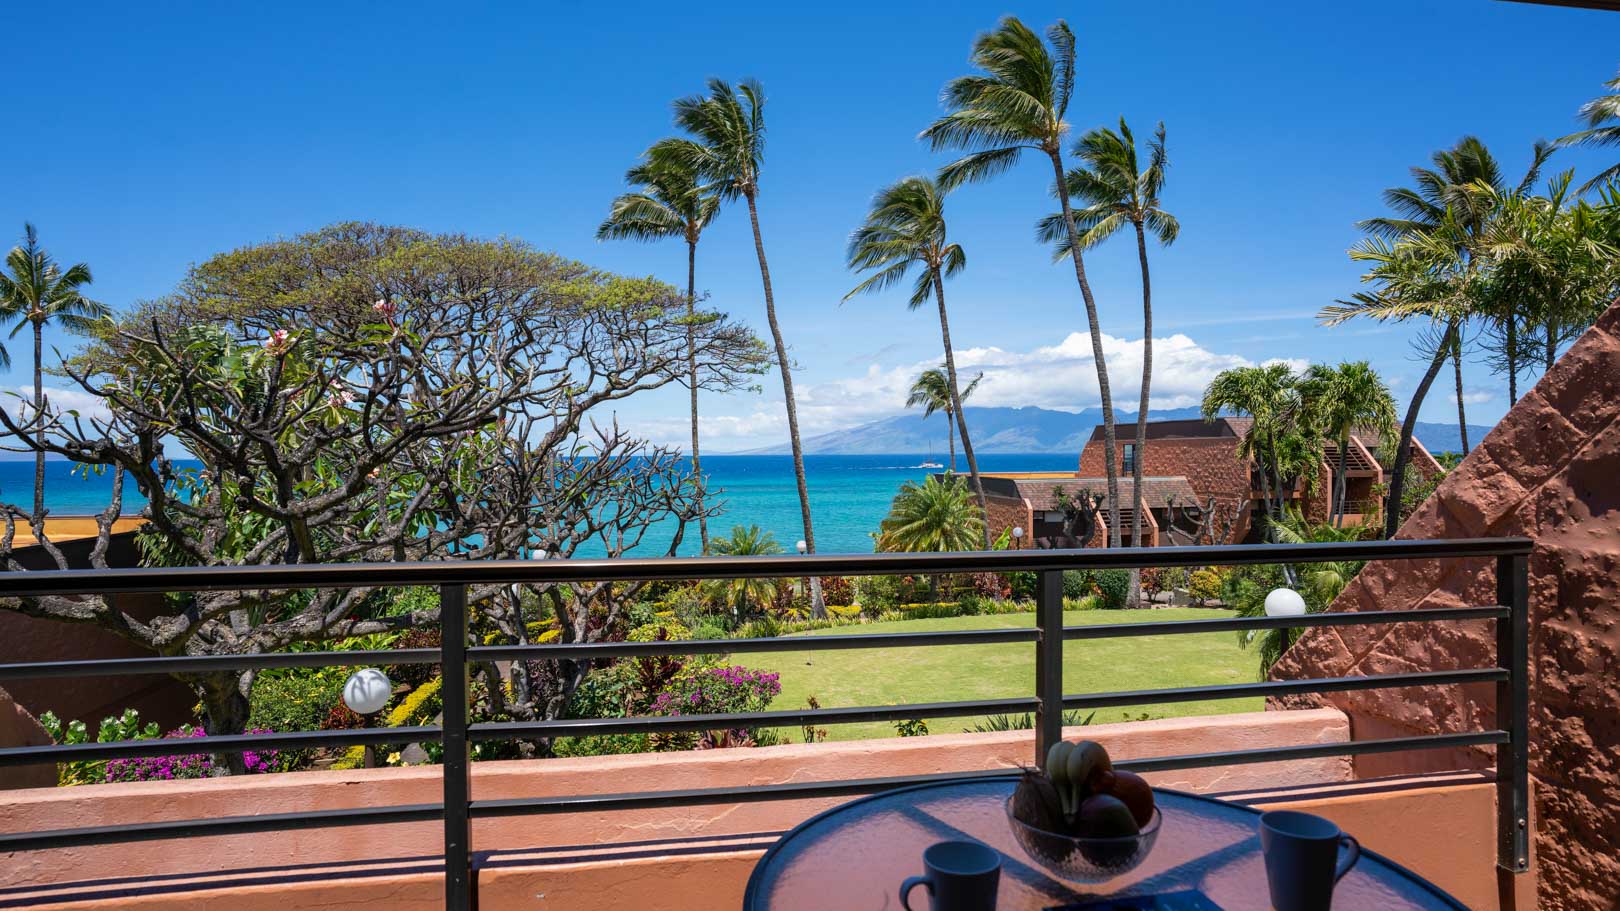 A breathtaking view from the balcony overseeing the blue ocean at VRI's Kuleana Club in Maui, Hawaii.